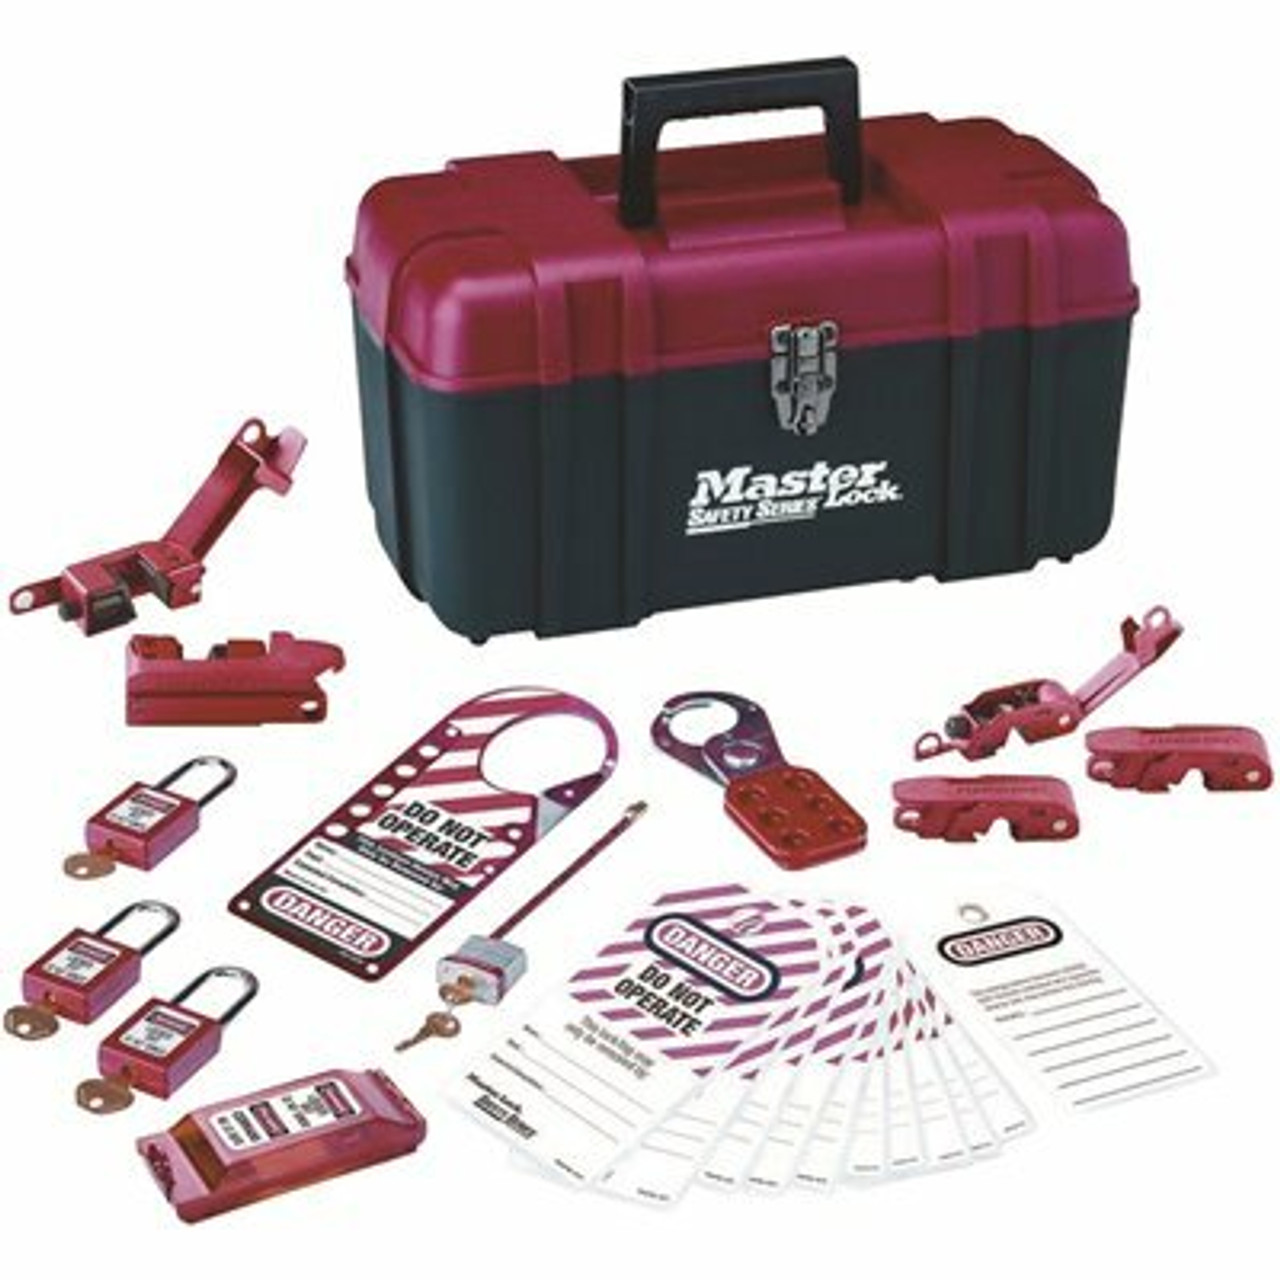 Master Lock Personal Lockout Accessory Kit